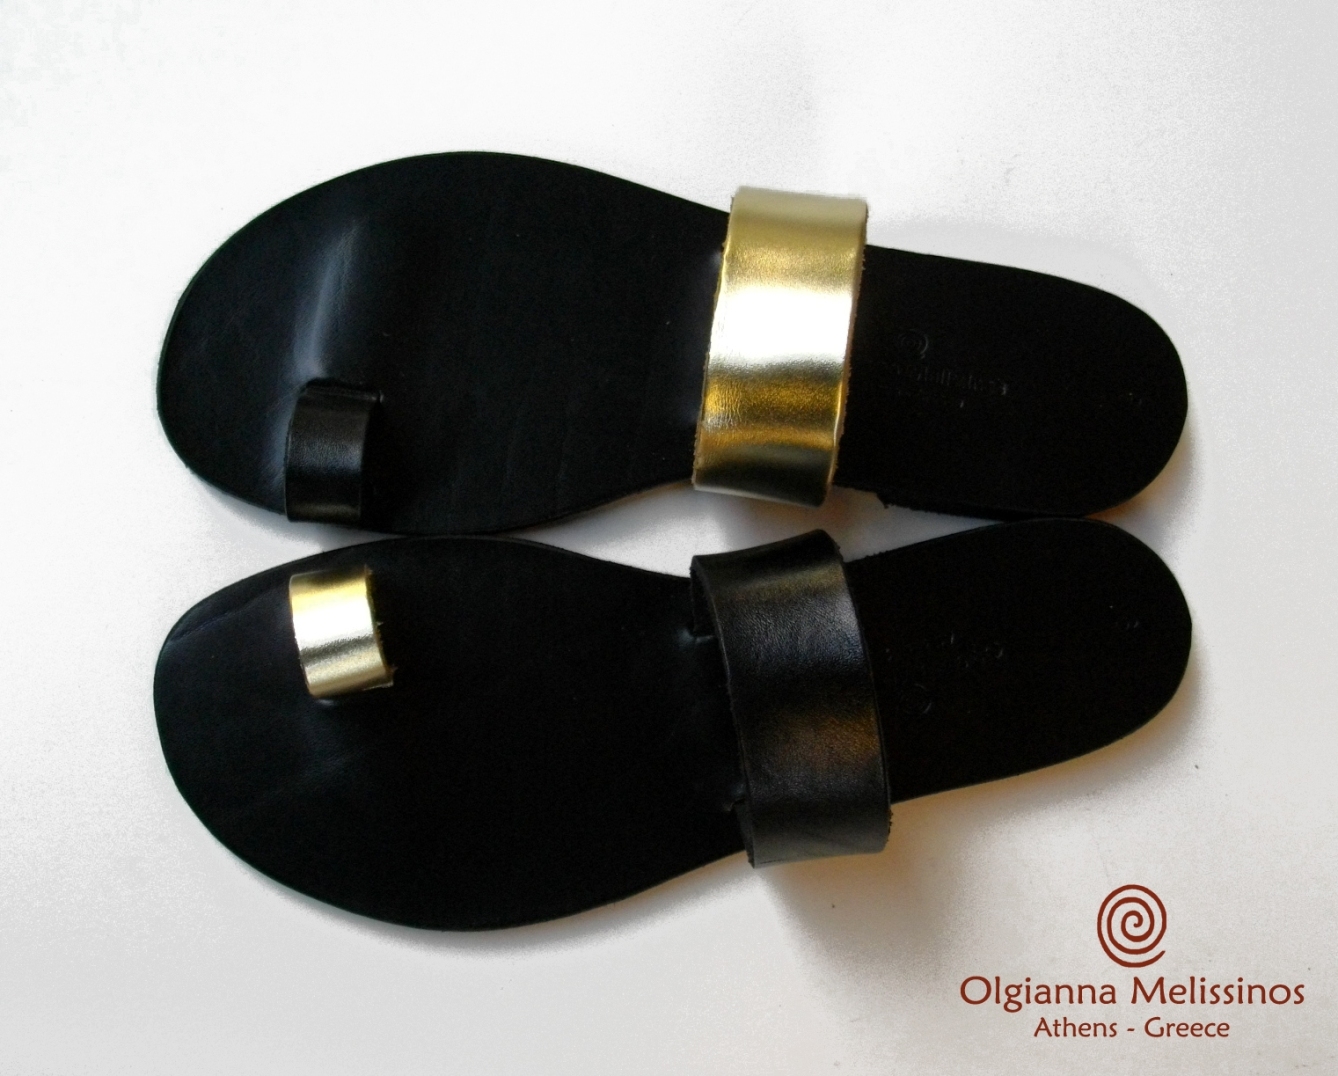  Melissinos. Handmade Greek leather sandals, belts and bags since 1920.